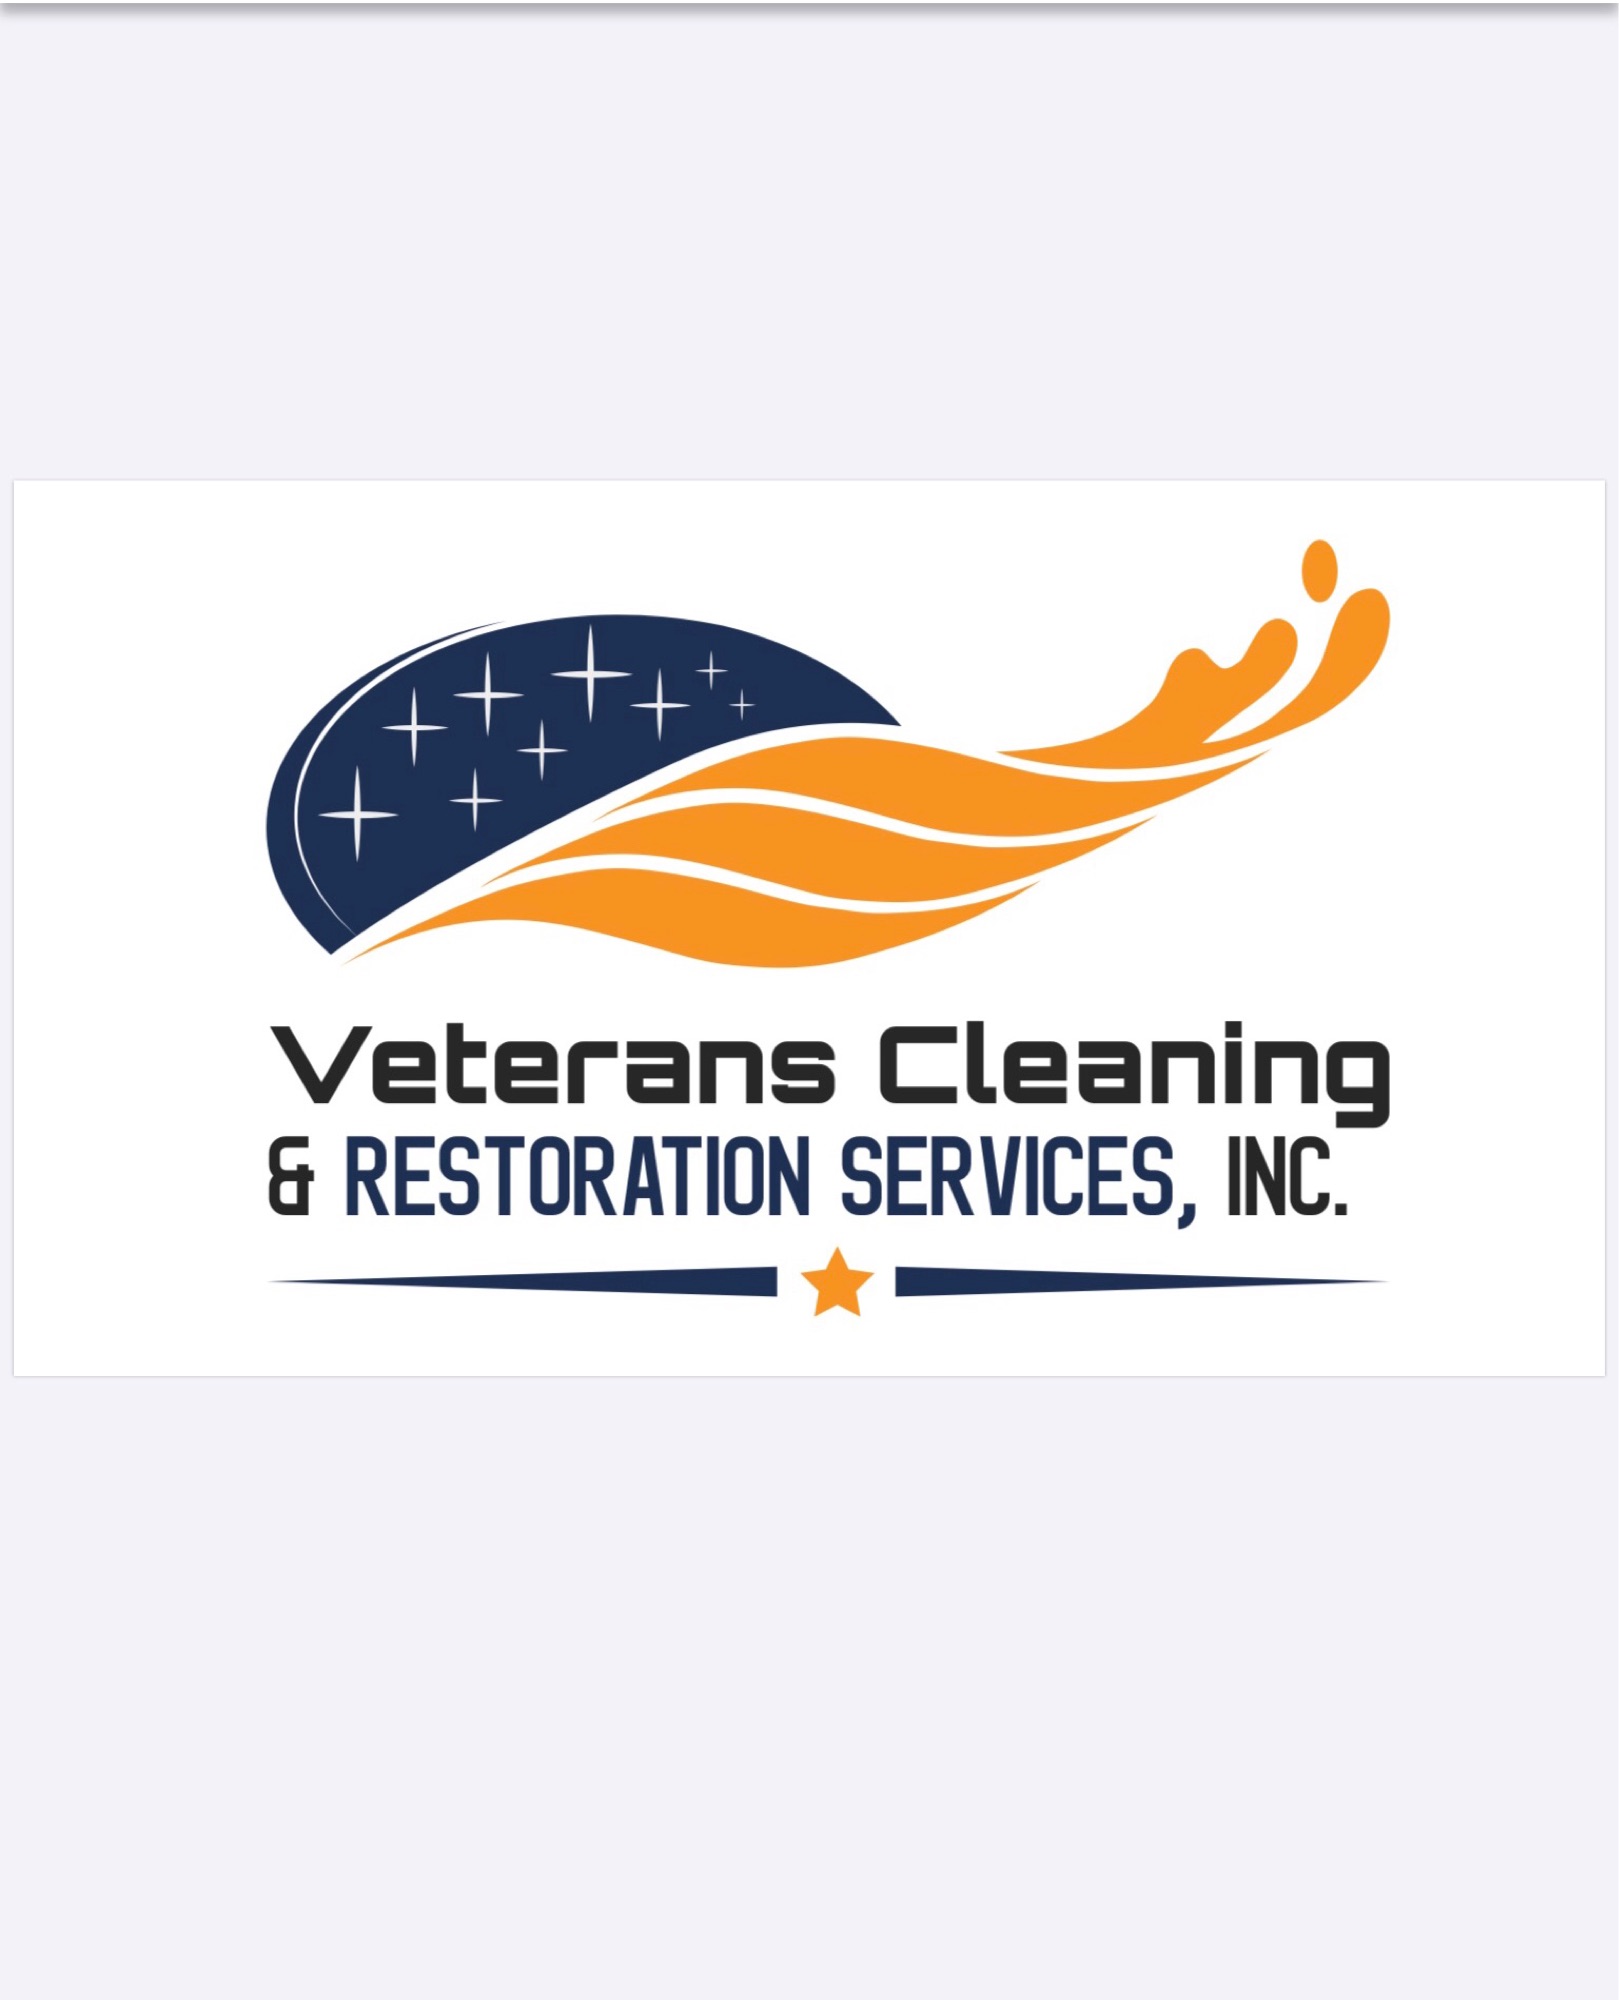 Veterans Cleaning and Restoration Services, Inc. Logo